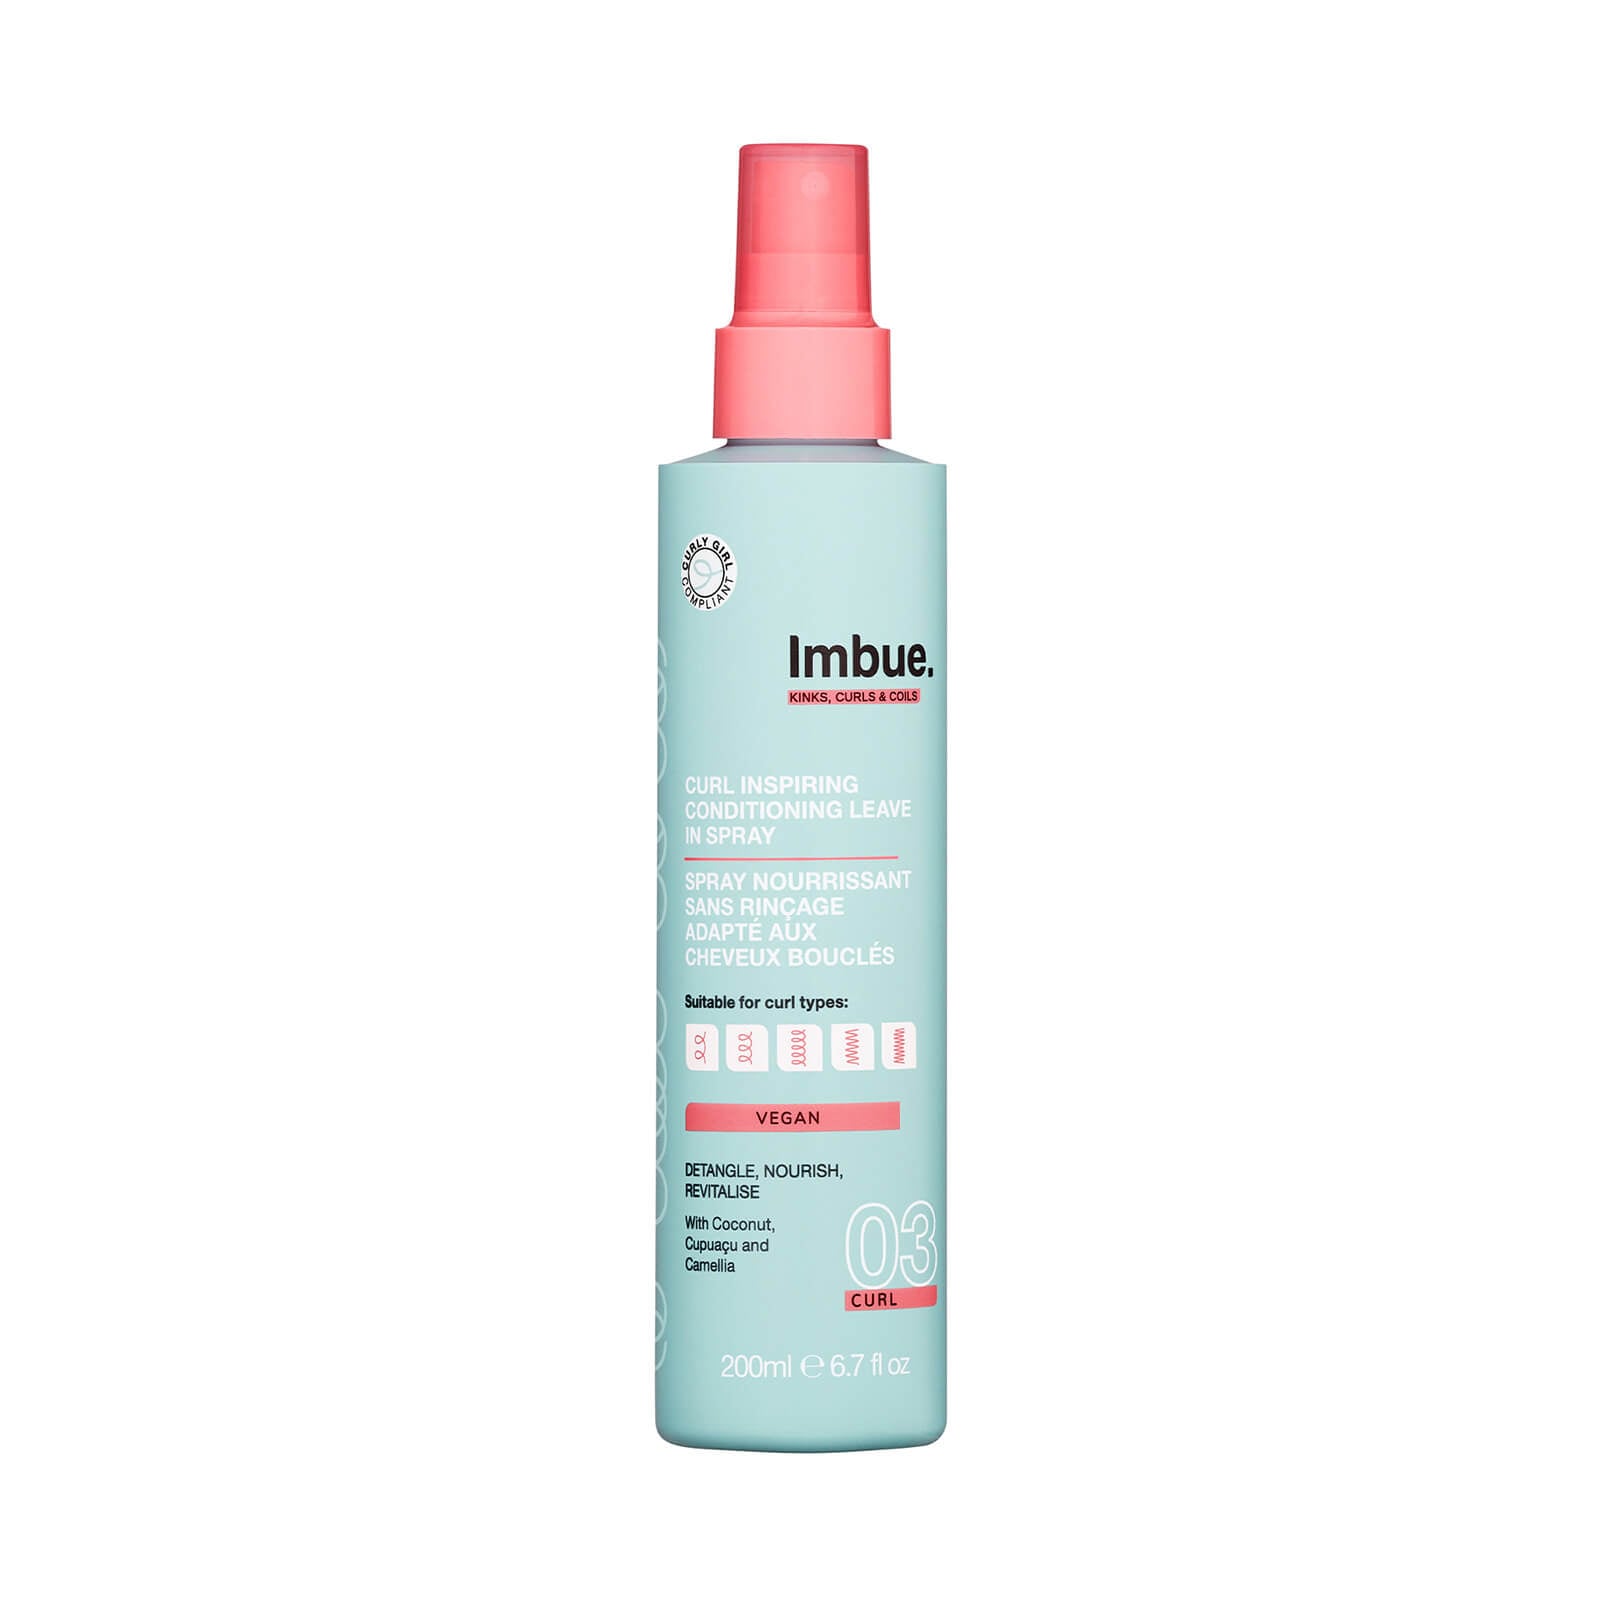 Imbue. Curl Inspiring Conditioning Leave-In Spray